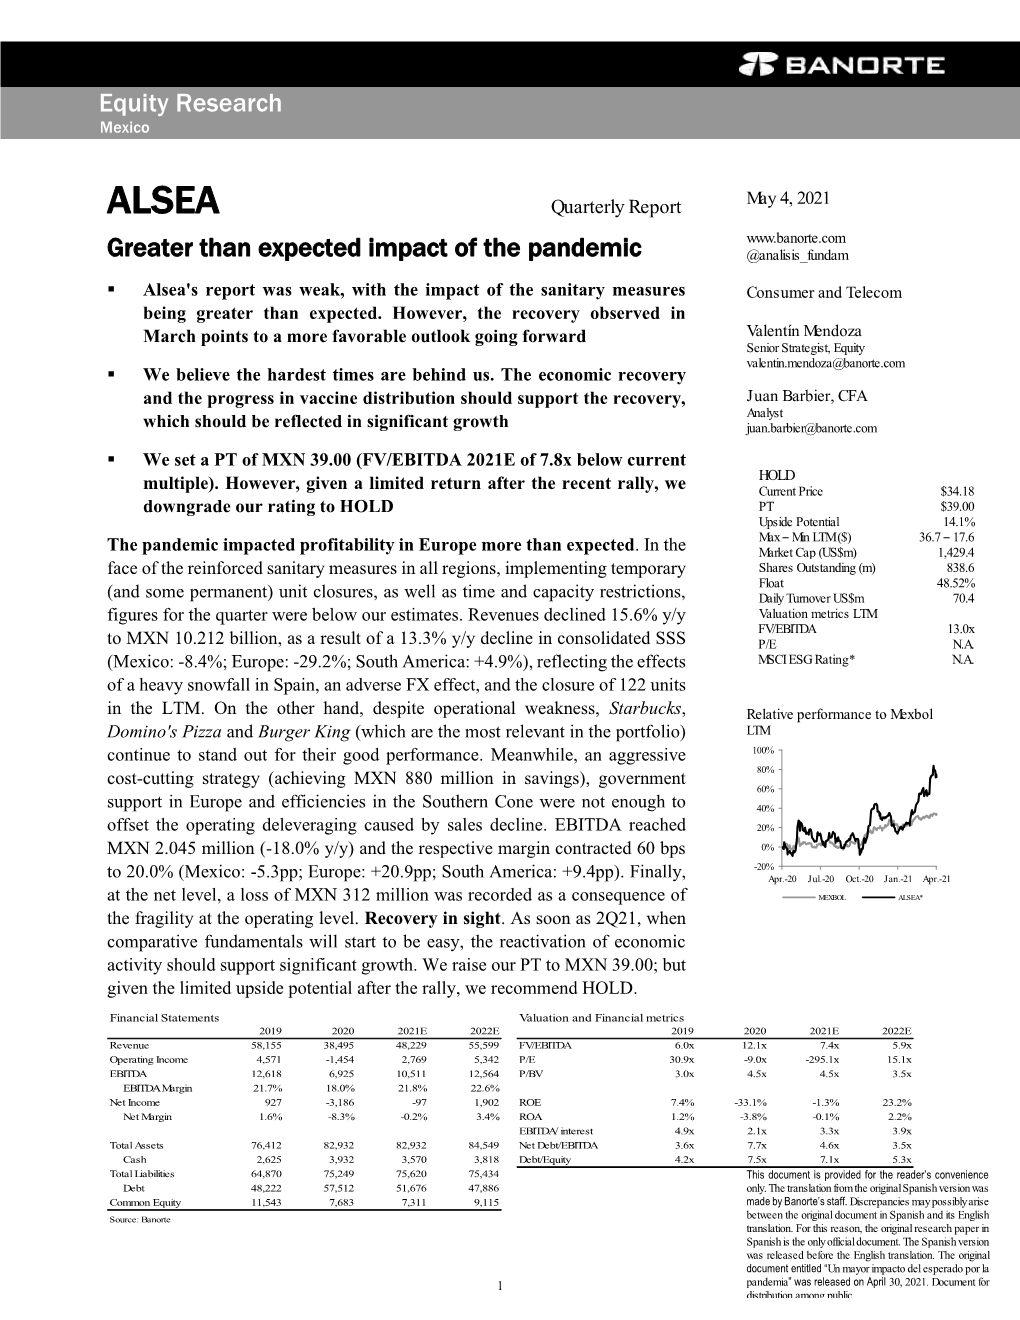 ALSEA Greater Than Expected Impact of the Pandemic @Analisis Fundam